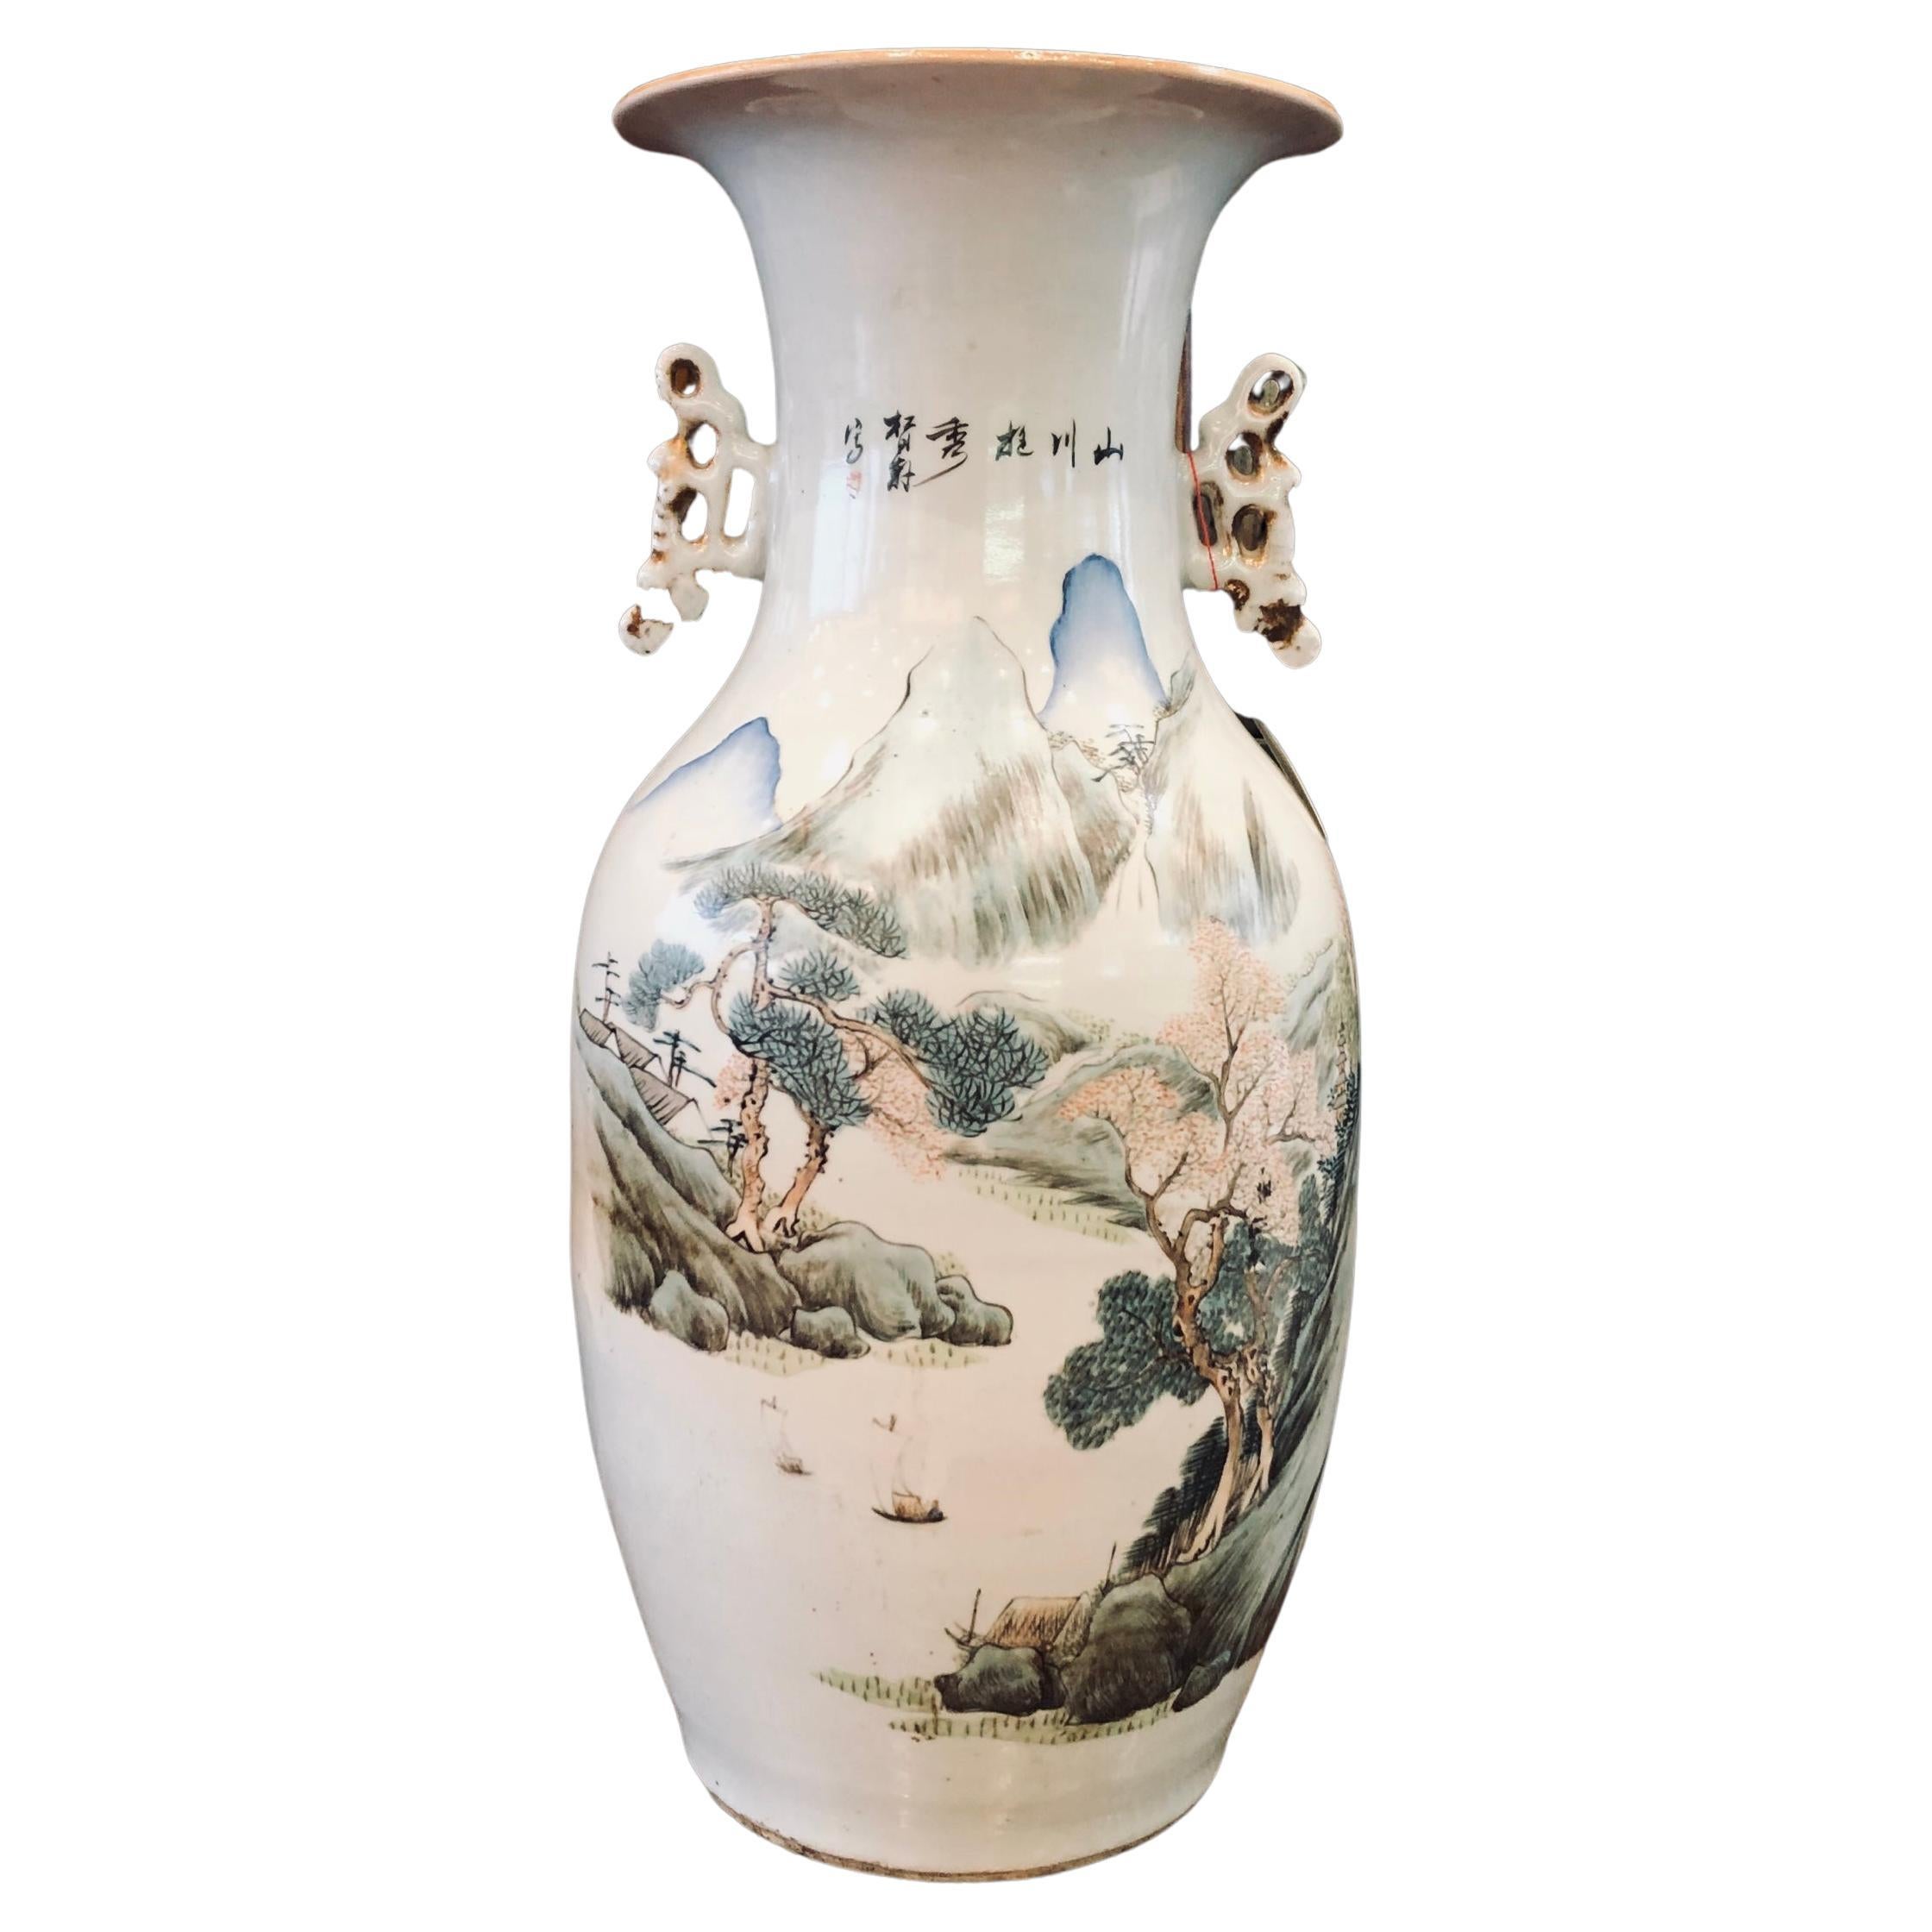 Chinese Porcelain Vase - Song Yue Xuan Signed - 1925 For Sale